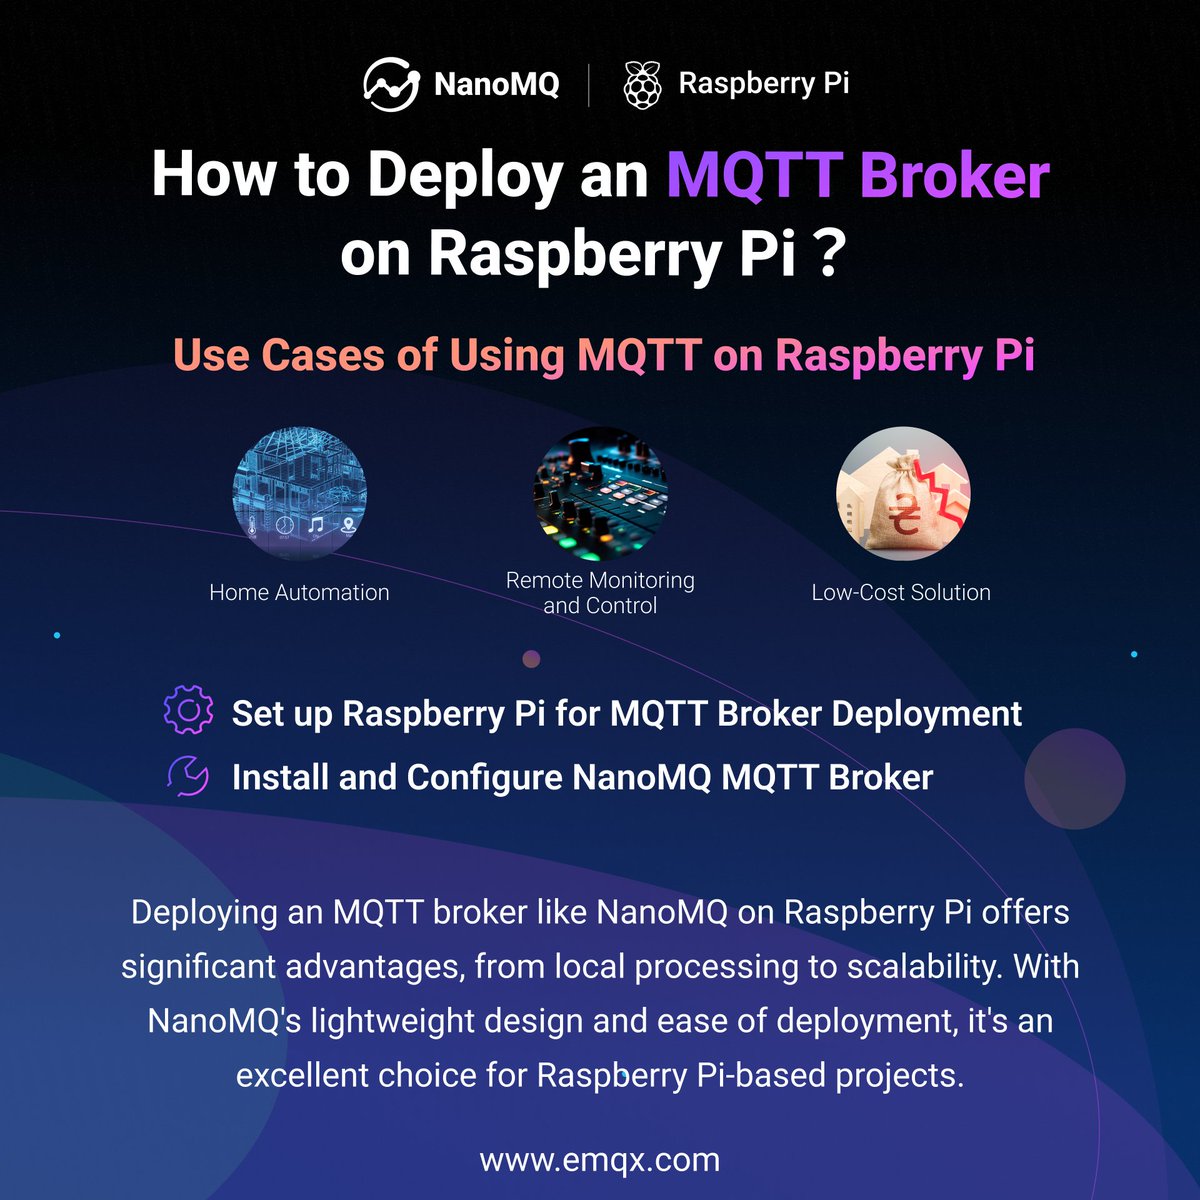 🚀 Join us on an #IoT journey powered by #MQTT and #RaspberryPi. Enjoy MQTT's efficient comms and Raspberry Pi's versatility. Elevate your #IoTproject with #NanoMQ for easy deployment and scalability. 

Step-by-step guide here 👇
💻 bit.ly/3WE4DUl